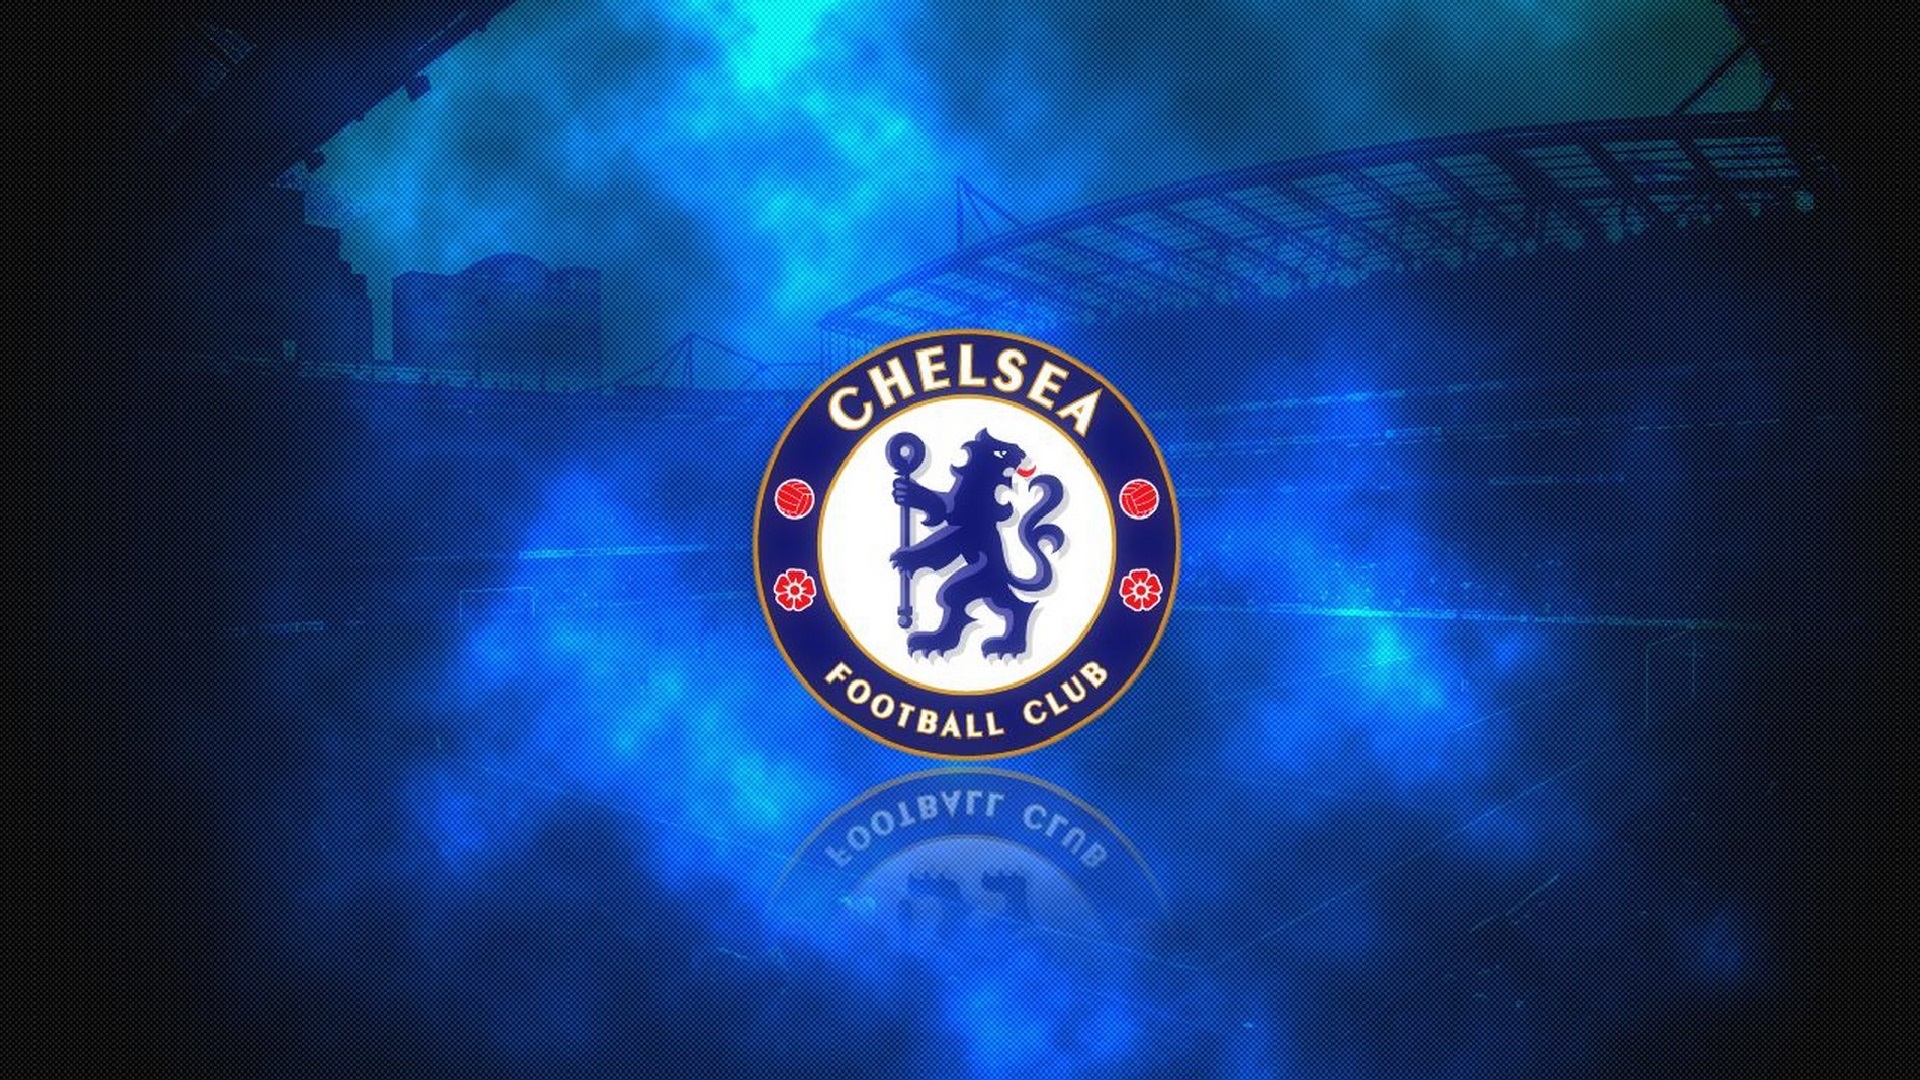 HD Desktop Wallpaper Chelsea Logo With high-resolution 1920X1080 pixel. You can use this wallpaper for your Desktop Computers, Mac Screensavers, Windows Backgrounds, iPhone Wallpapers, Tablet or Android Lock screen and another Mobile device